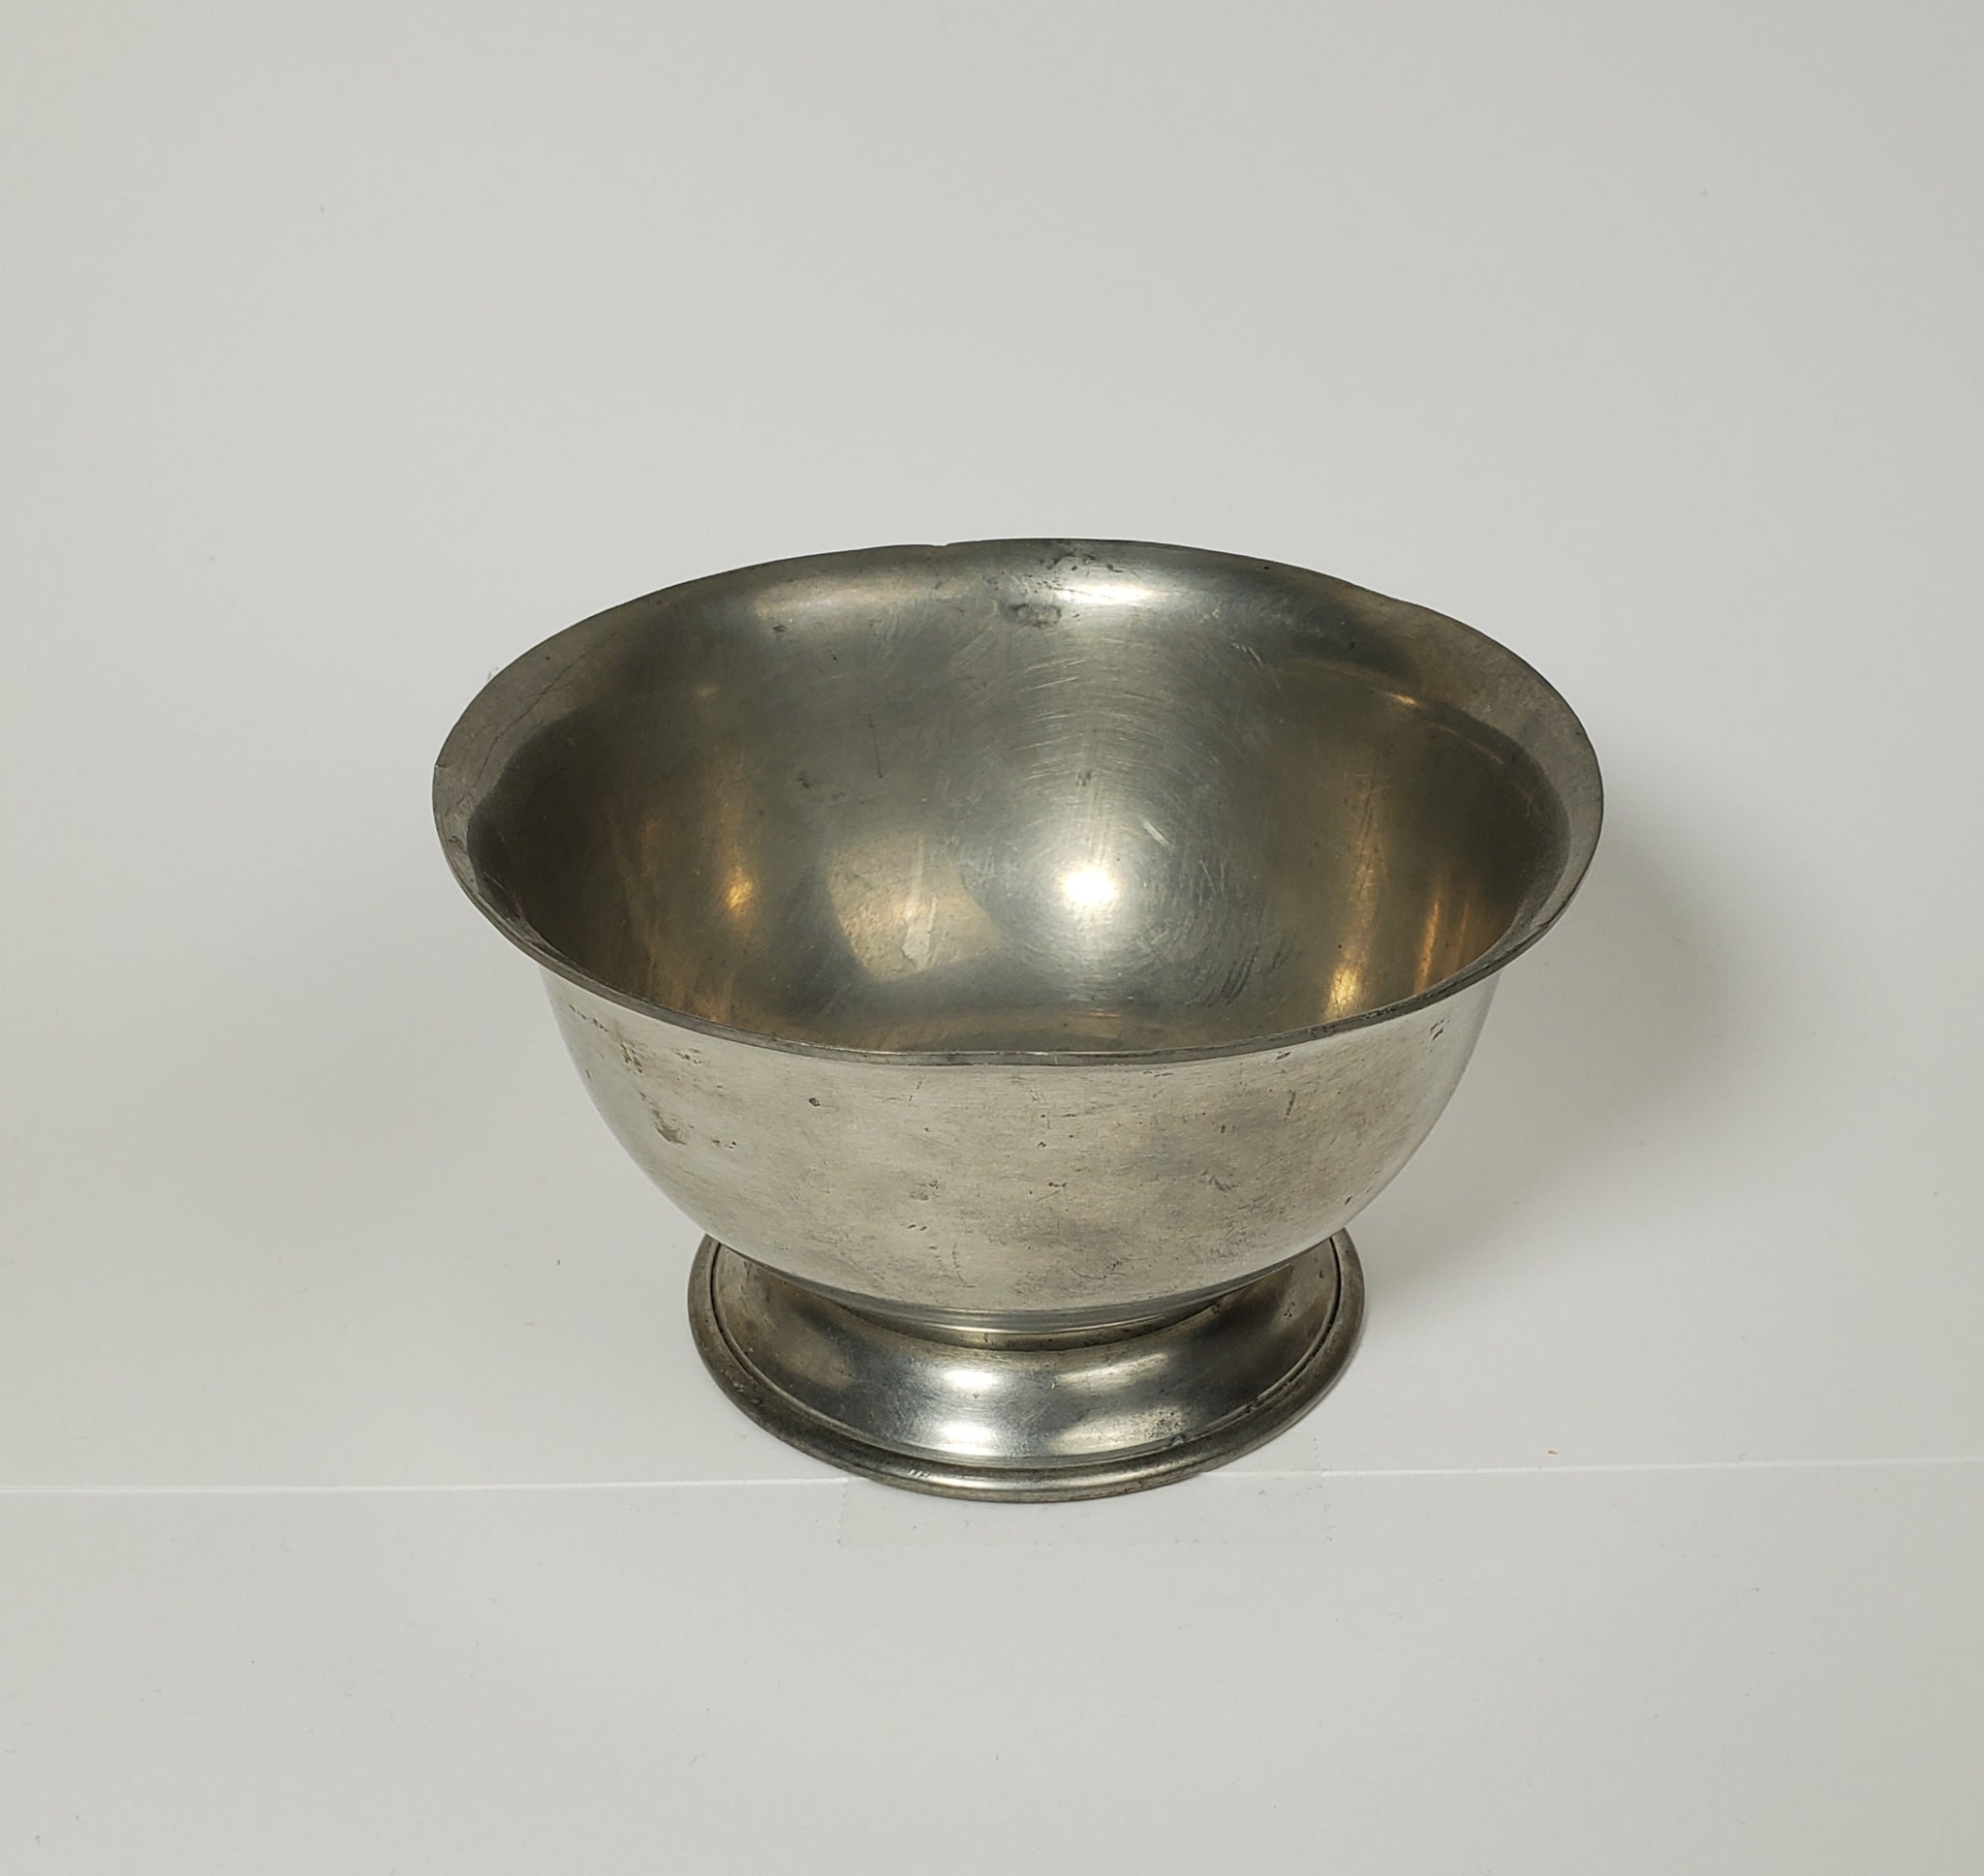 Woodbury Pewterers - Pewter Footed Bowl